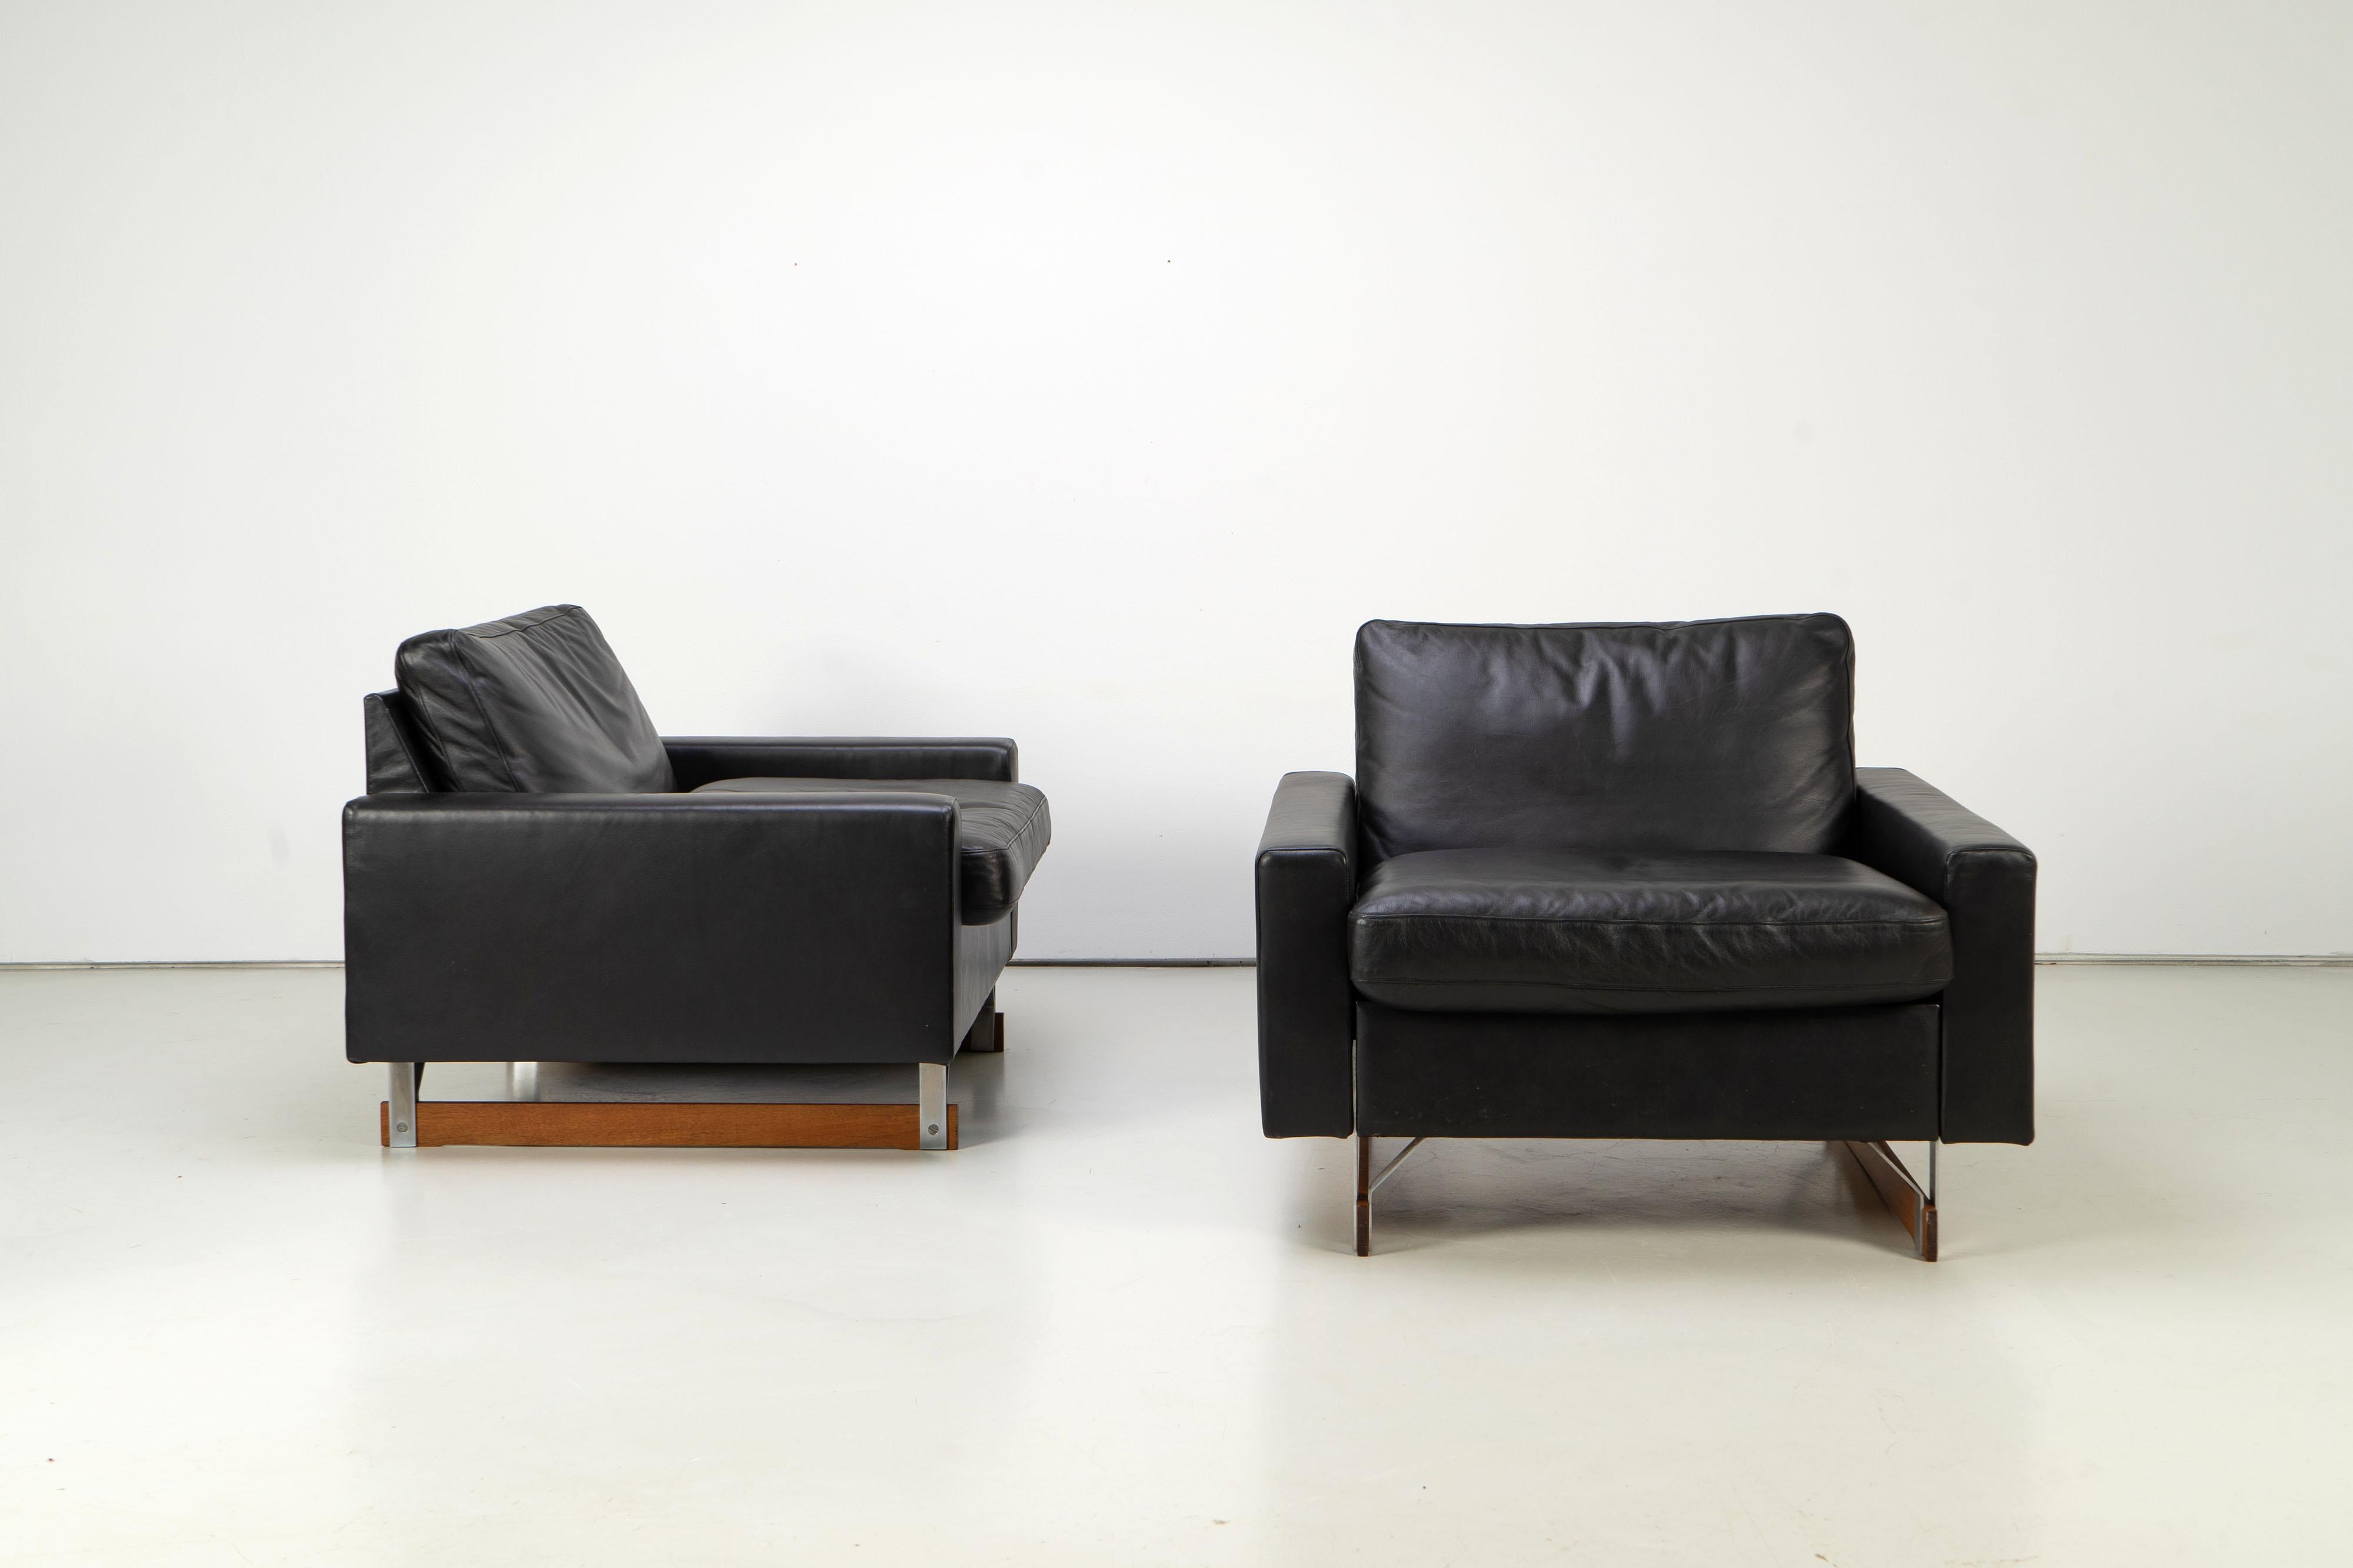 Set of Two Mid-Century Modern Leather Club Chairs with Wooden Sleds, 1960s For Sale 5